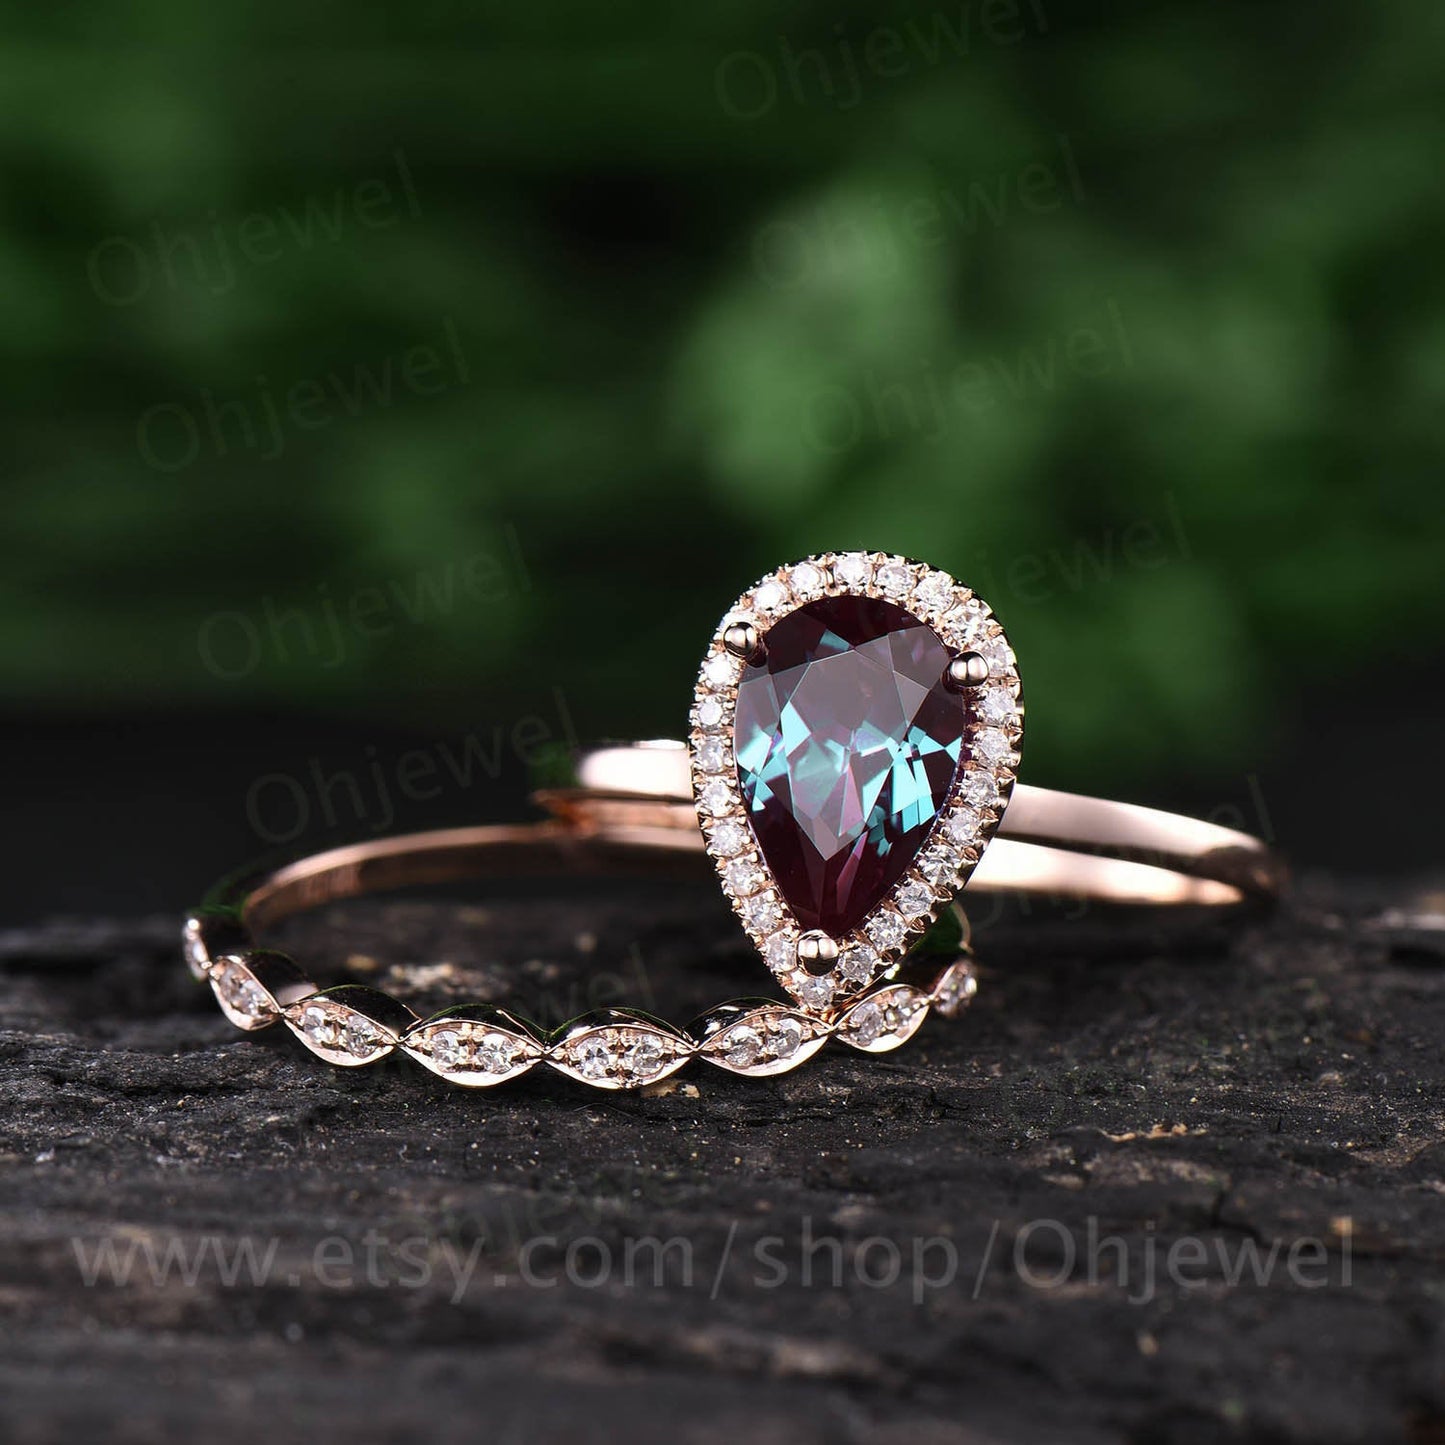 2pcs marquise diamond halo ring unique vintage engagement ring color change alexandrite engagement ring set rose gold wedding birthday gift